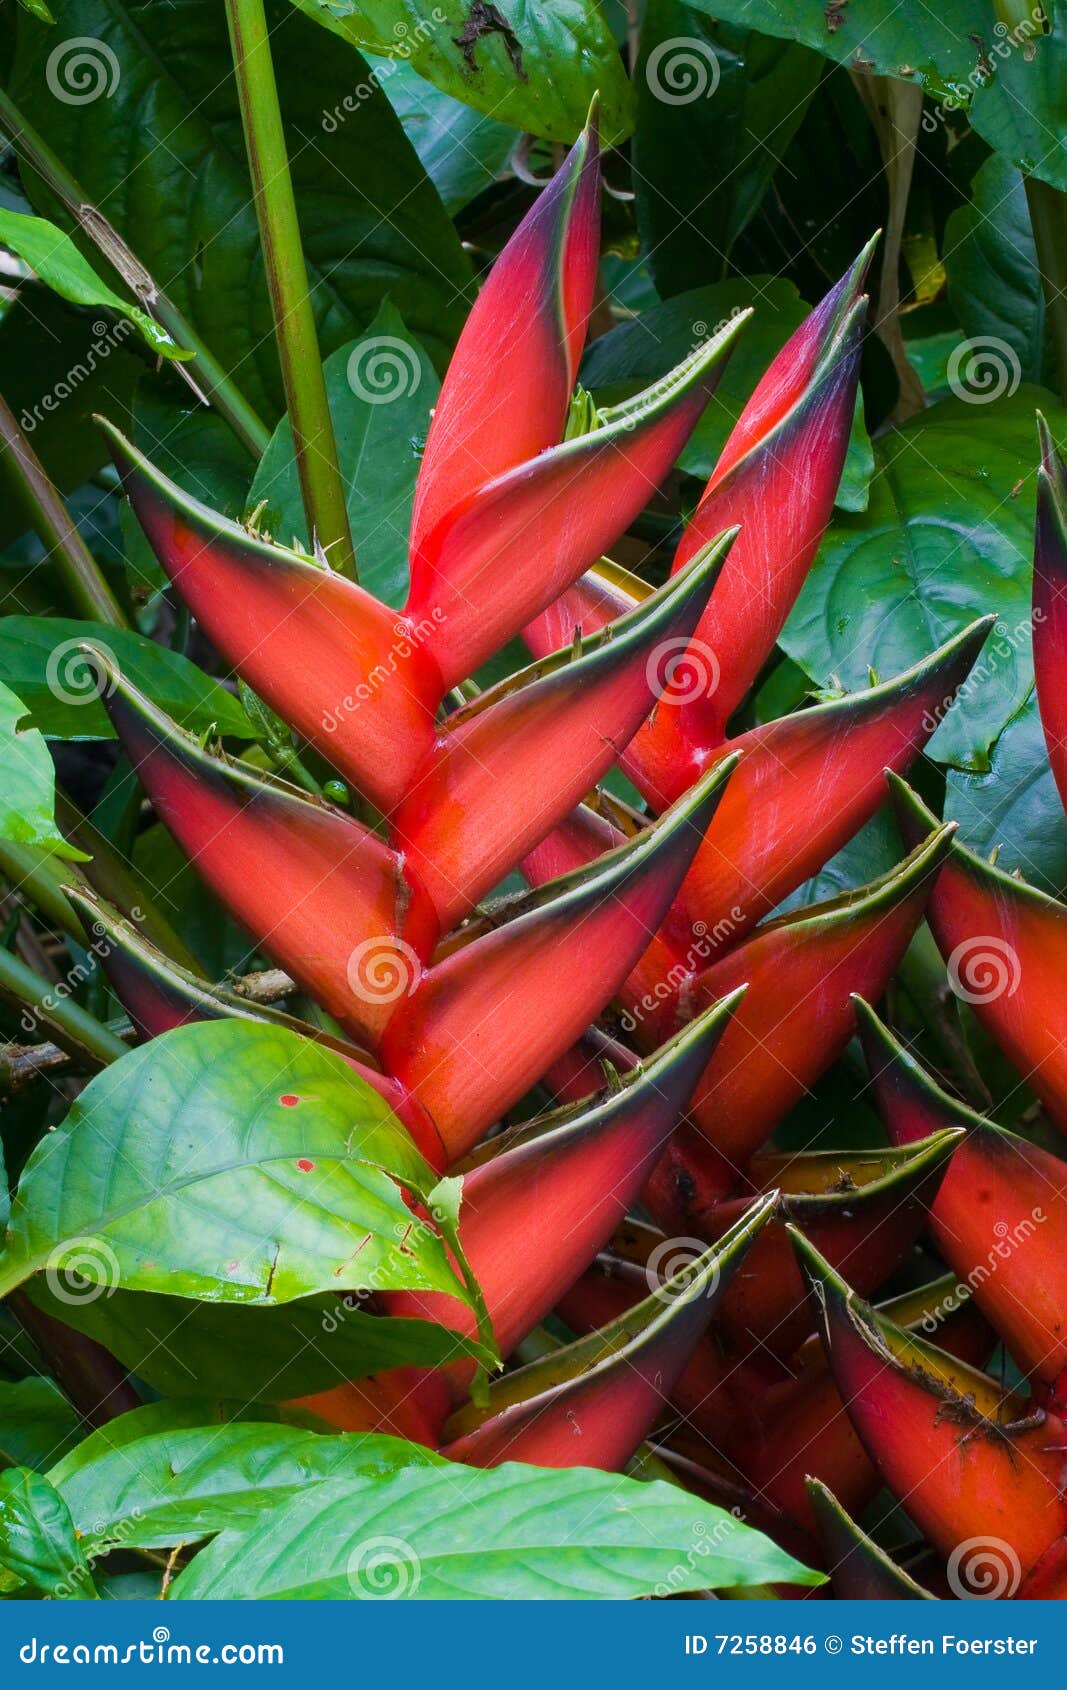 heliconia flowers